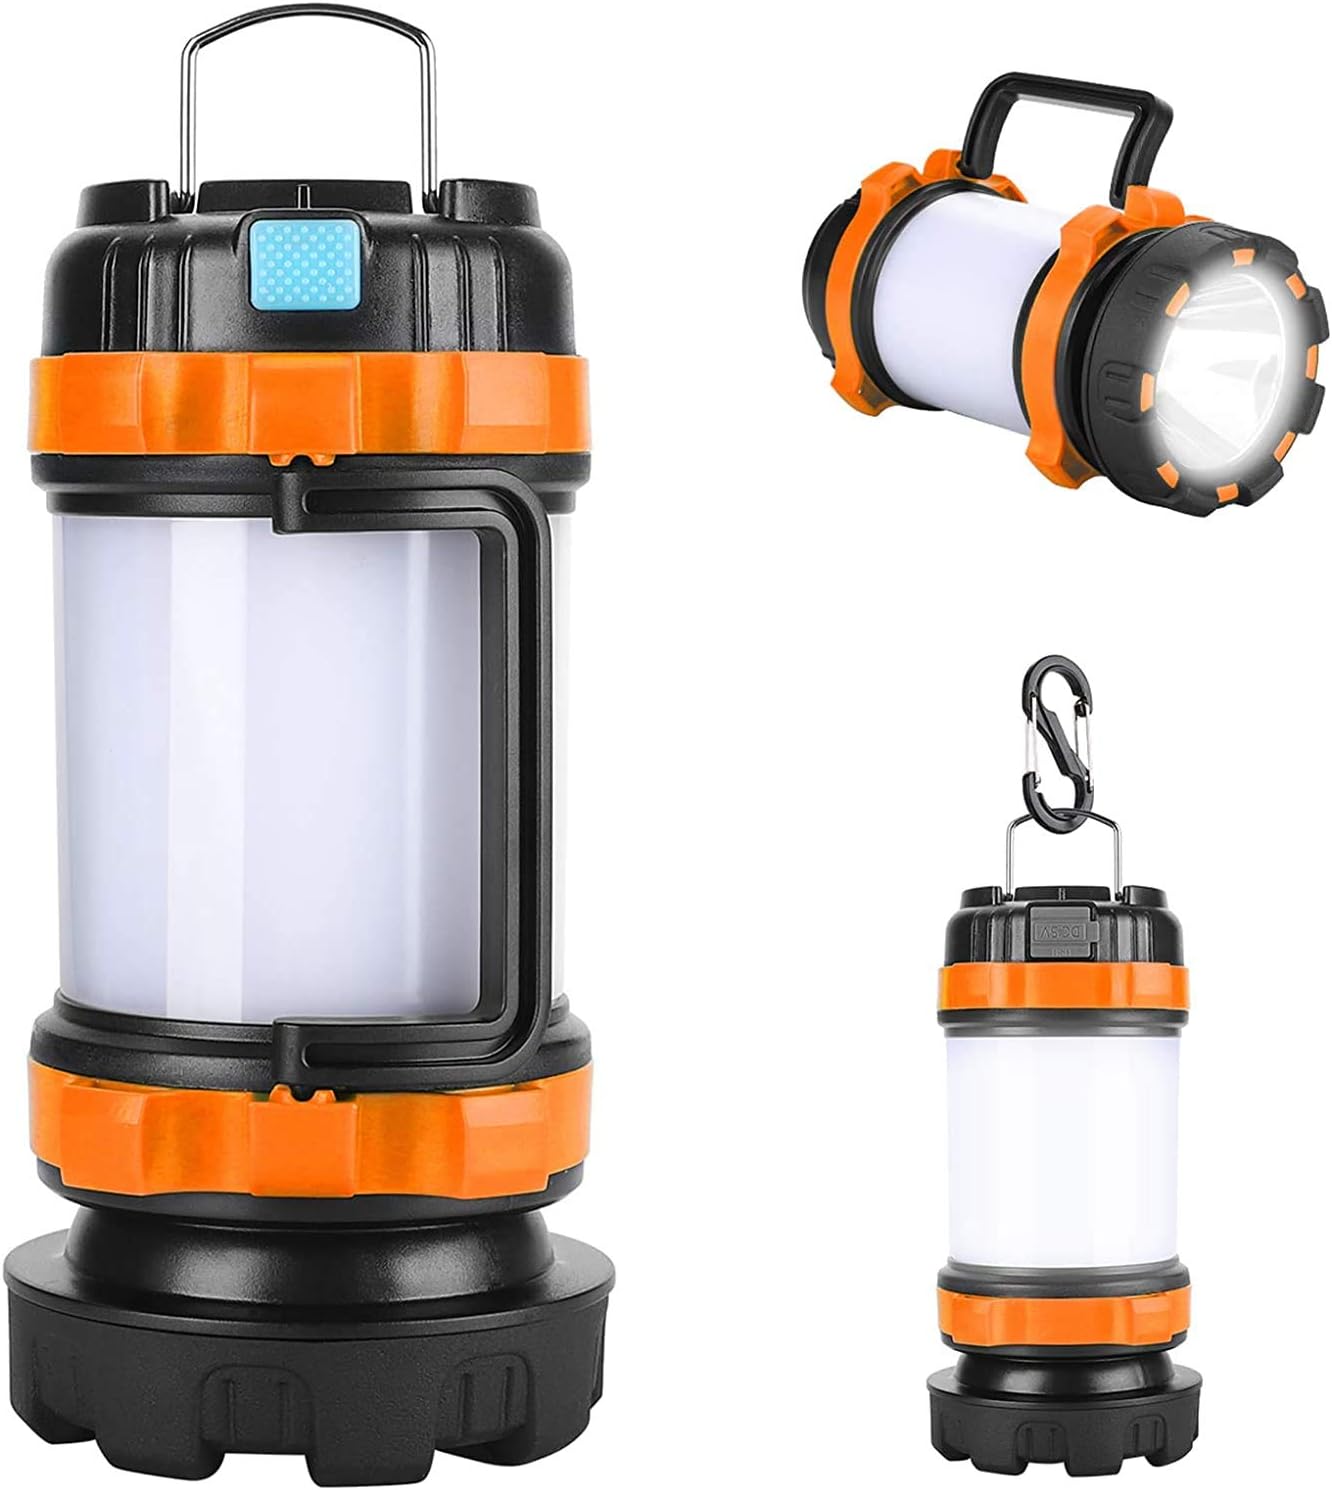 IODOO 10000mAh 4000Lm Flashlight Portable LED Camping Lantern Rechargeable Light 30W with Magnet, Power Bank , Ipx4 Waterproof Tent Light Power